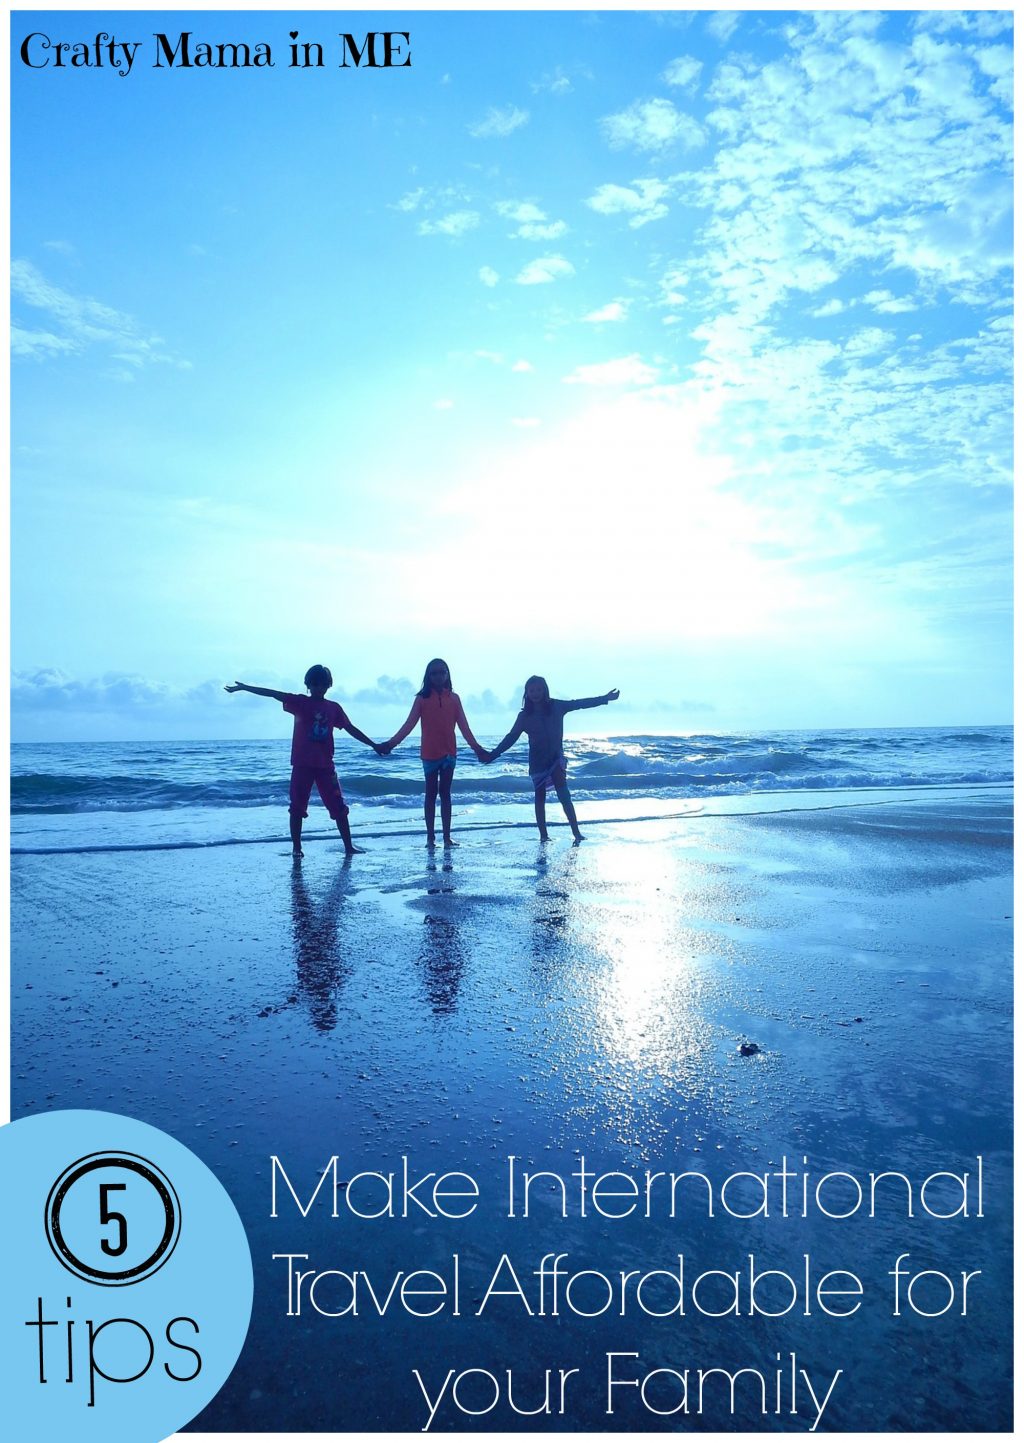 4 Tips to Make International Travel Affordable for Your Family